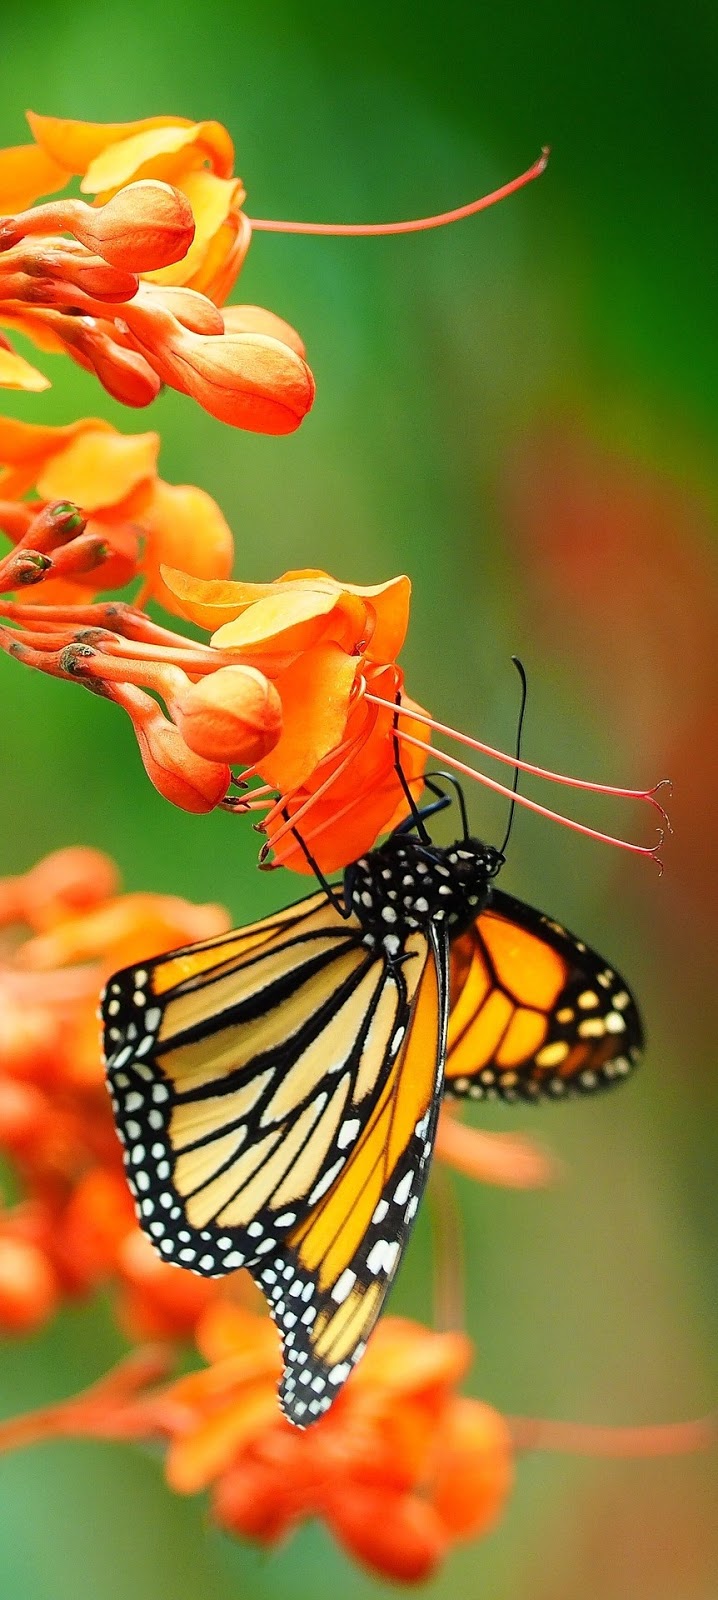 Amazing photo of a monarch butterfly.